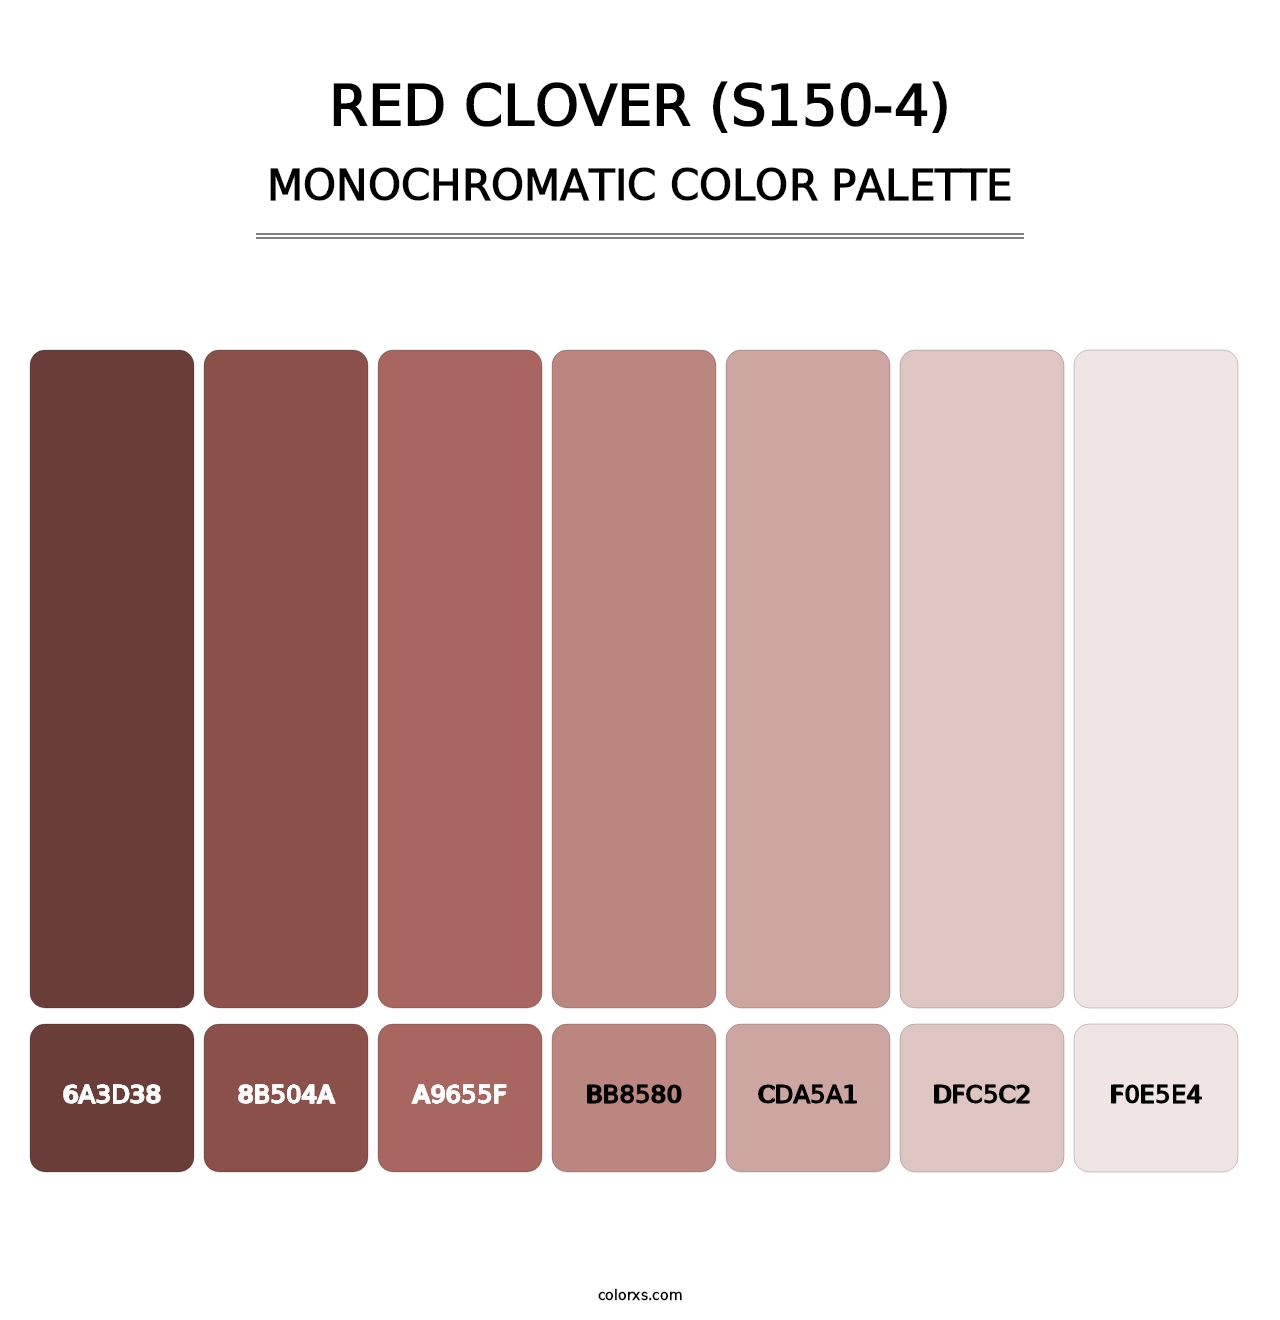 Red Clover (S150-4) - Monochromatic Color Palette